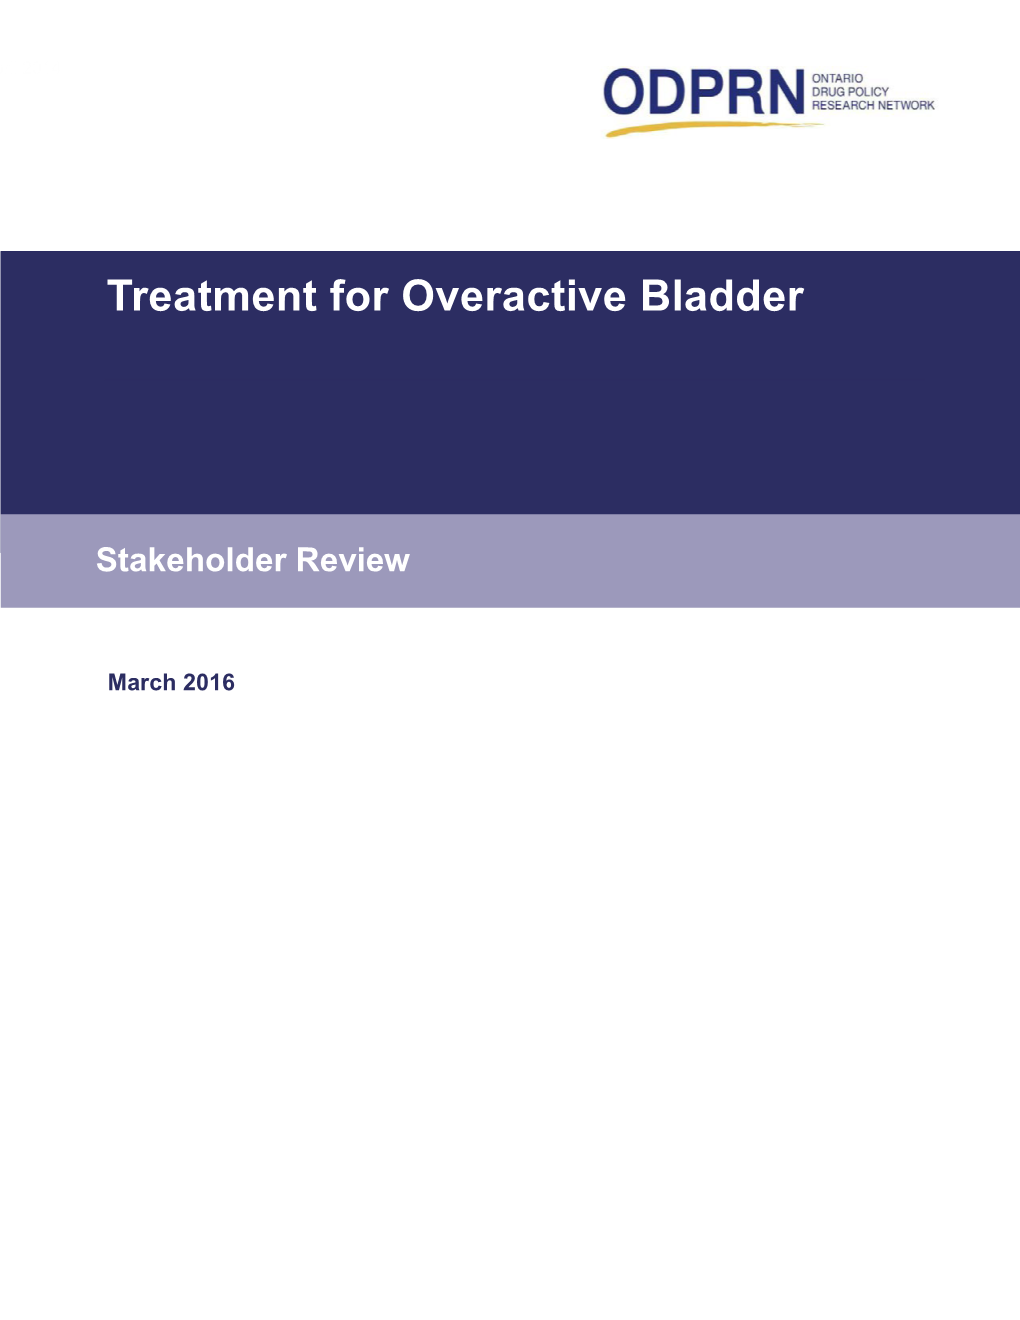 Treatment for Overactive Bladder